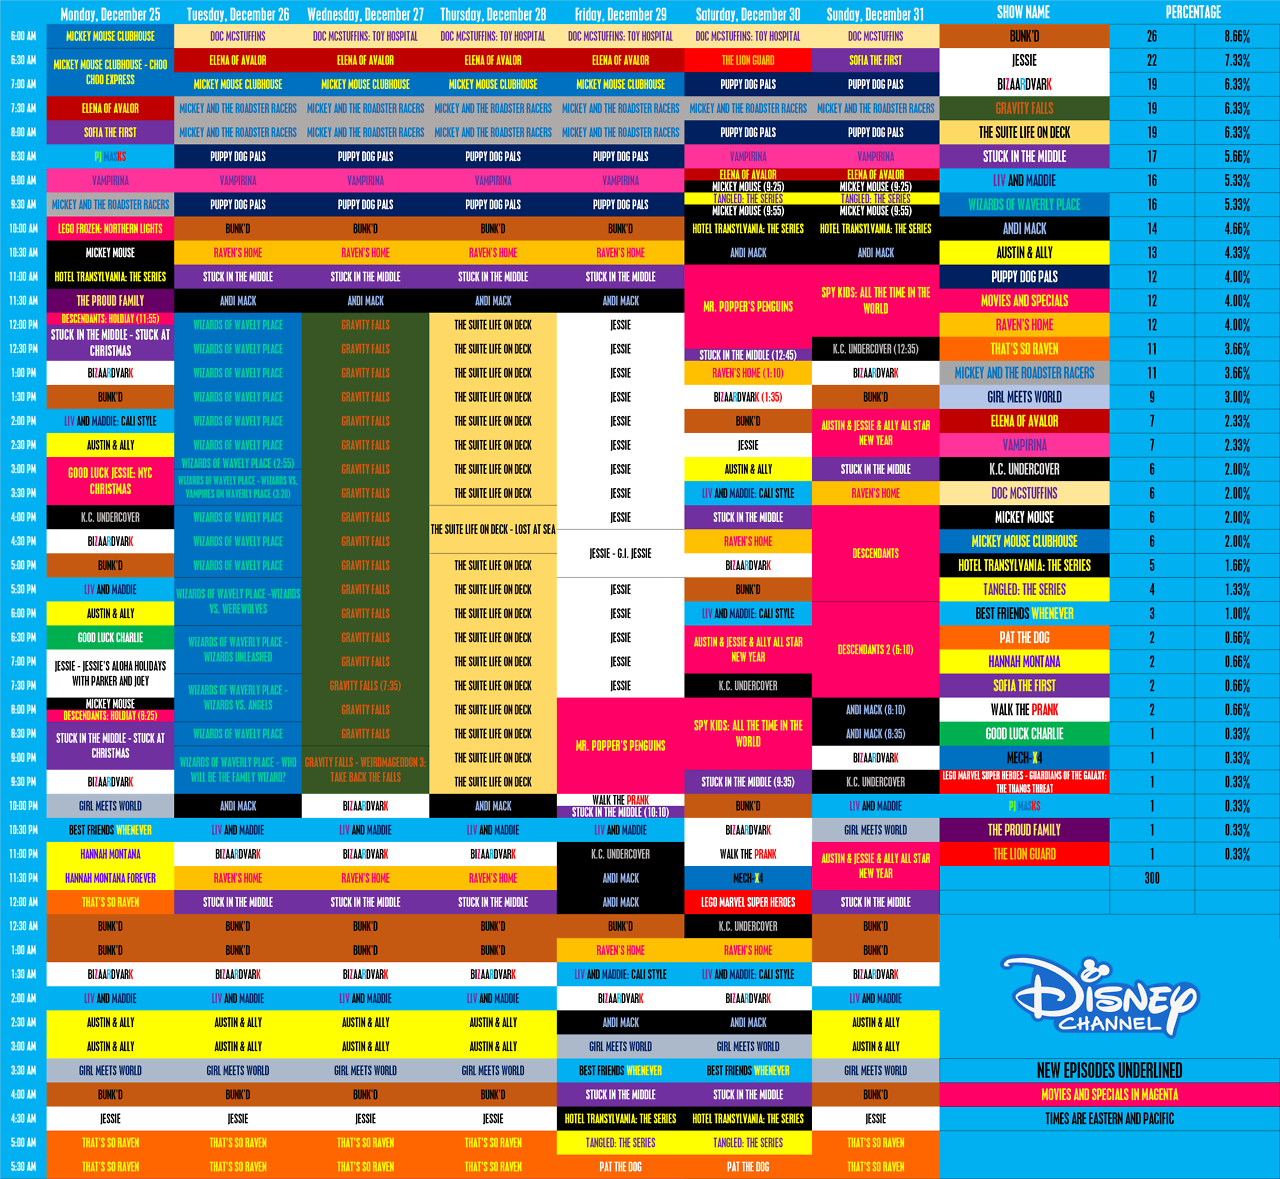 disney schedule thread and archive — here's disney channel's